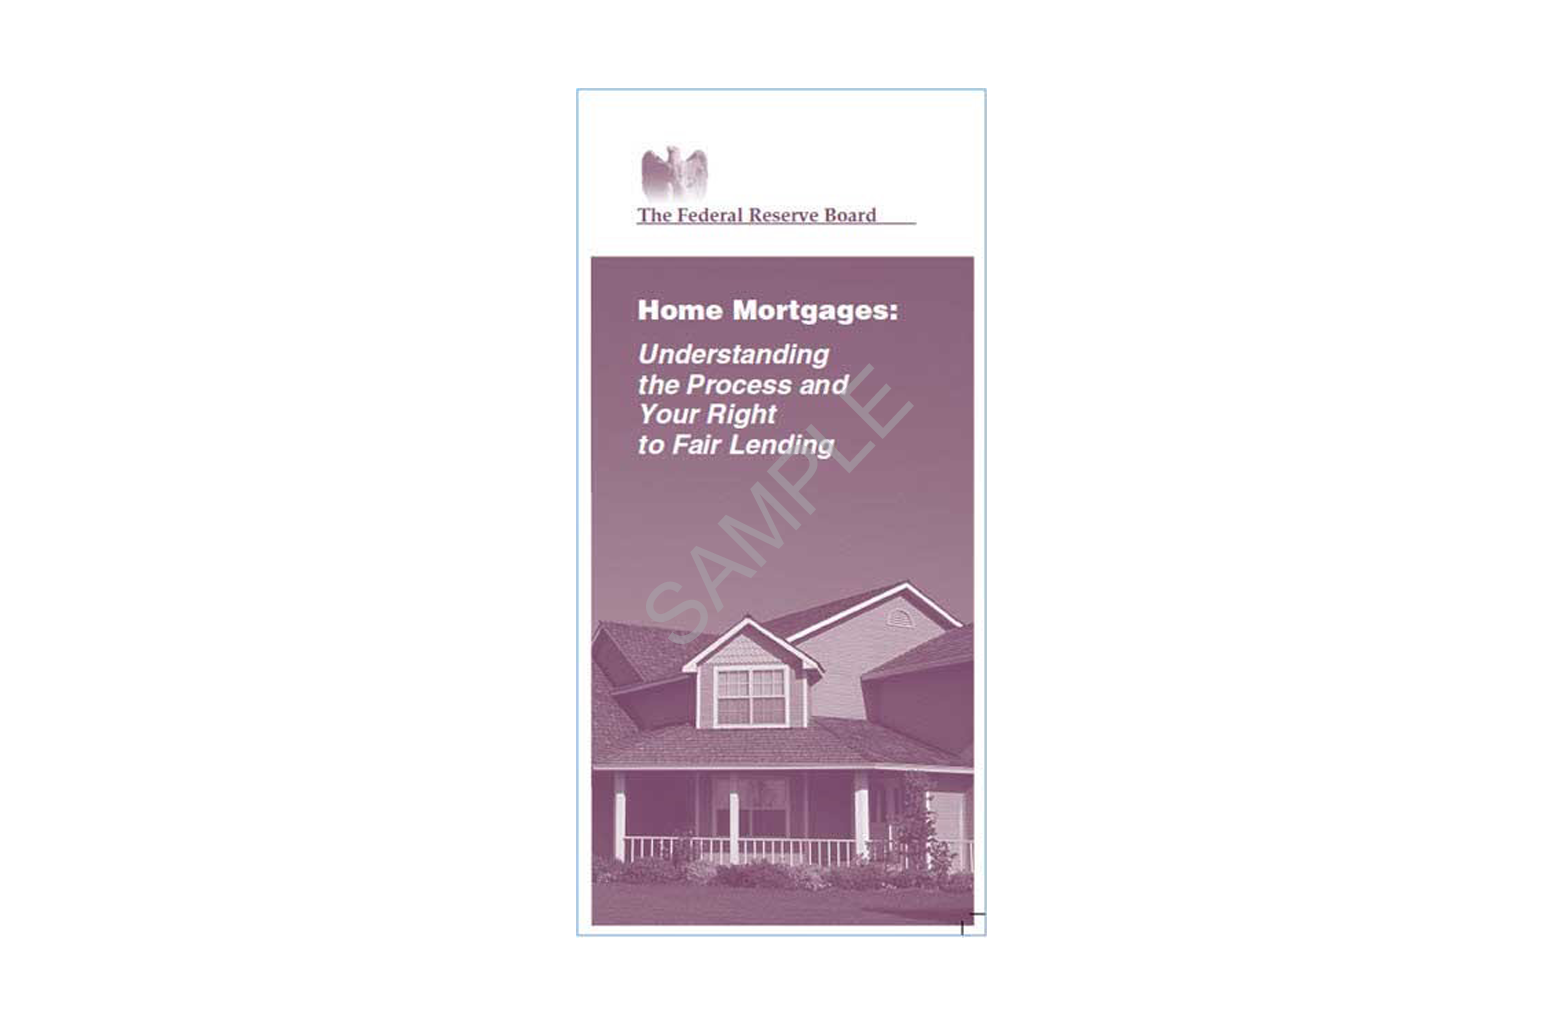 Printed Ira Hsa And Mortgage Materials Wolters Kluwer 6357